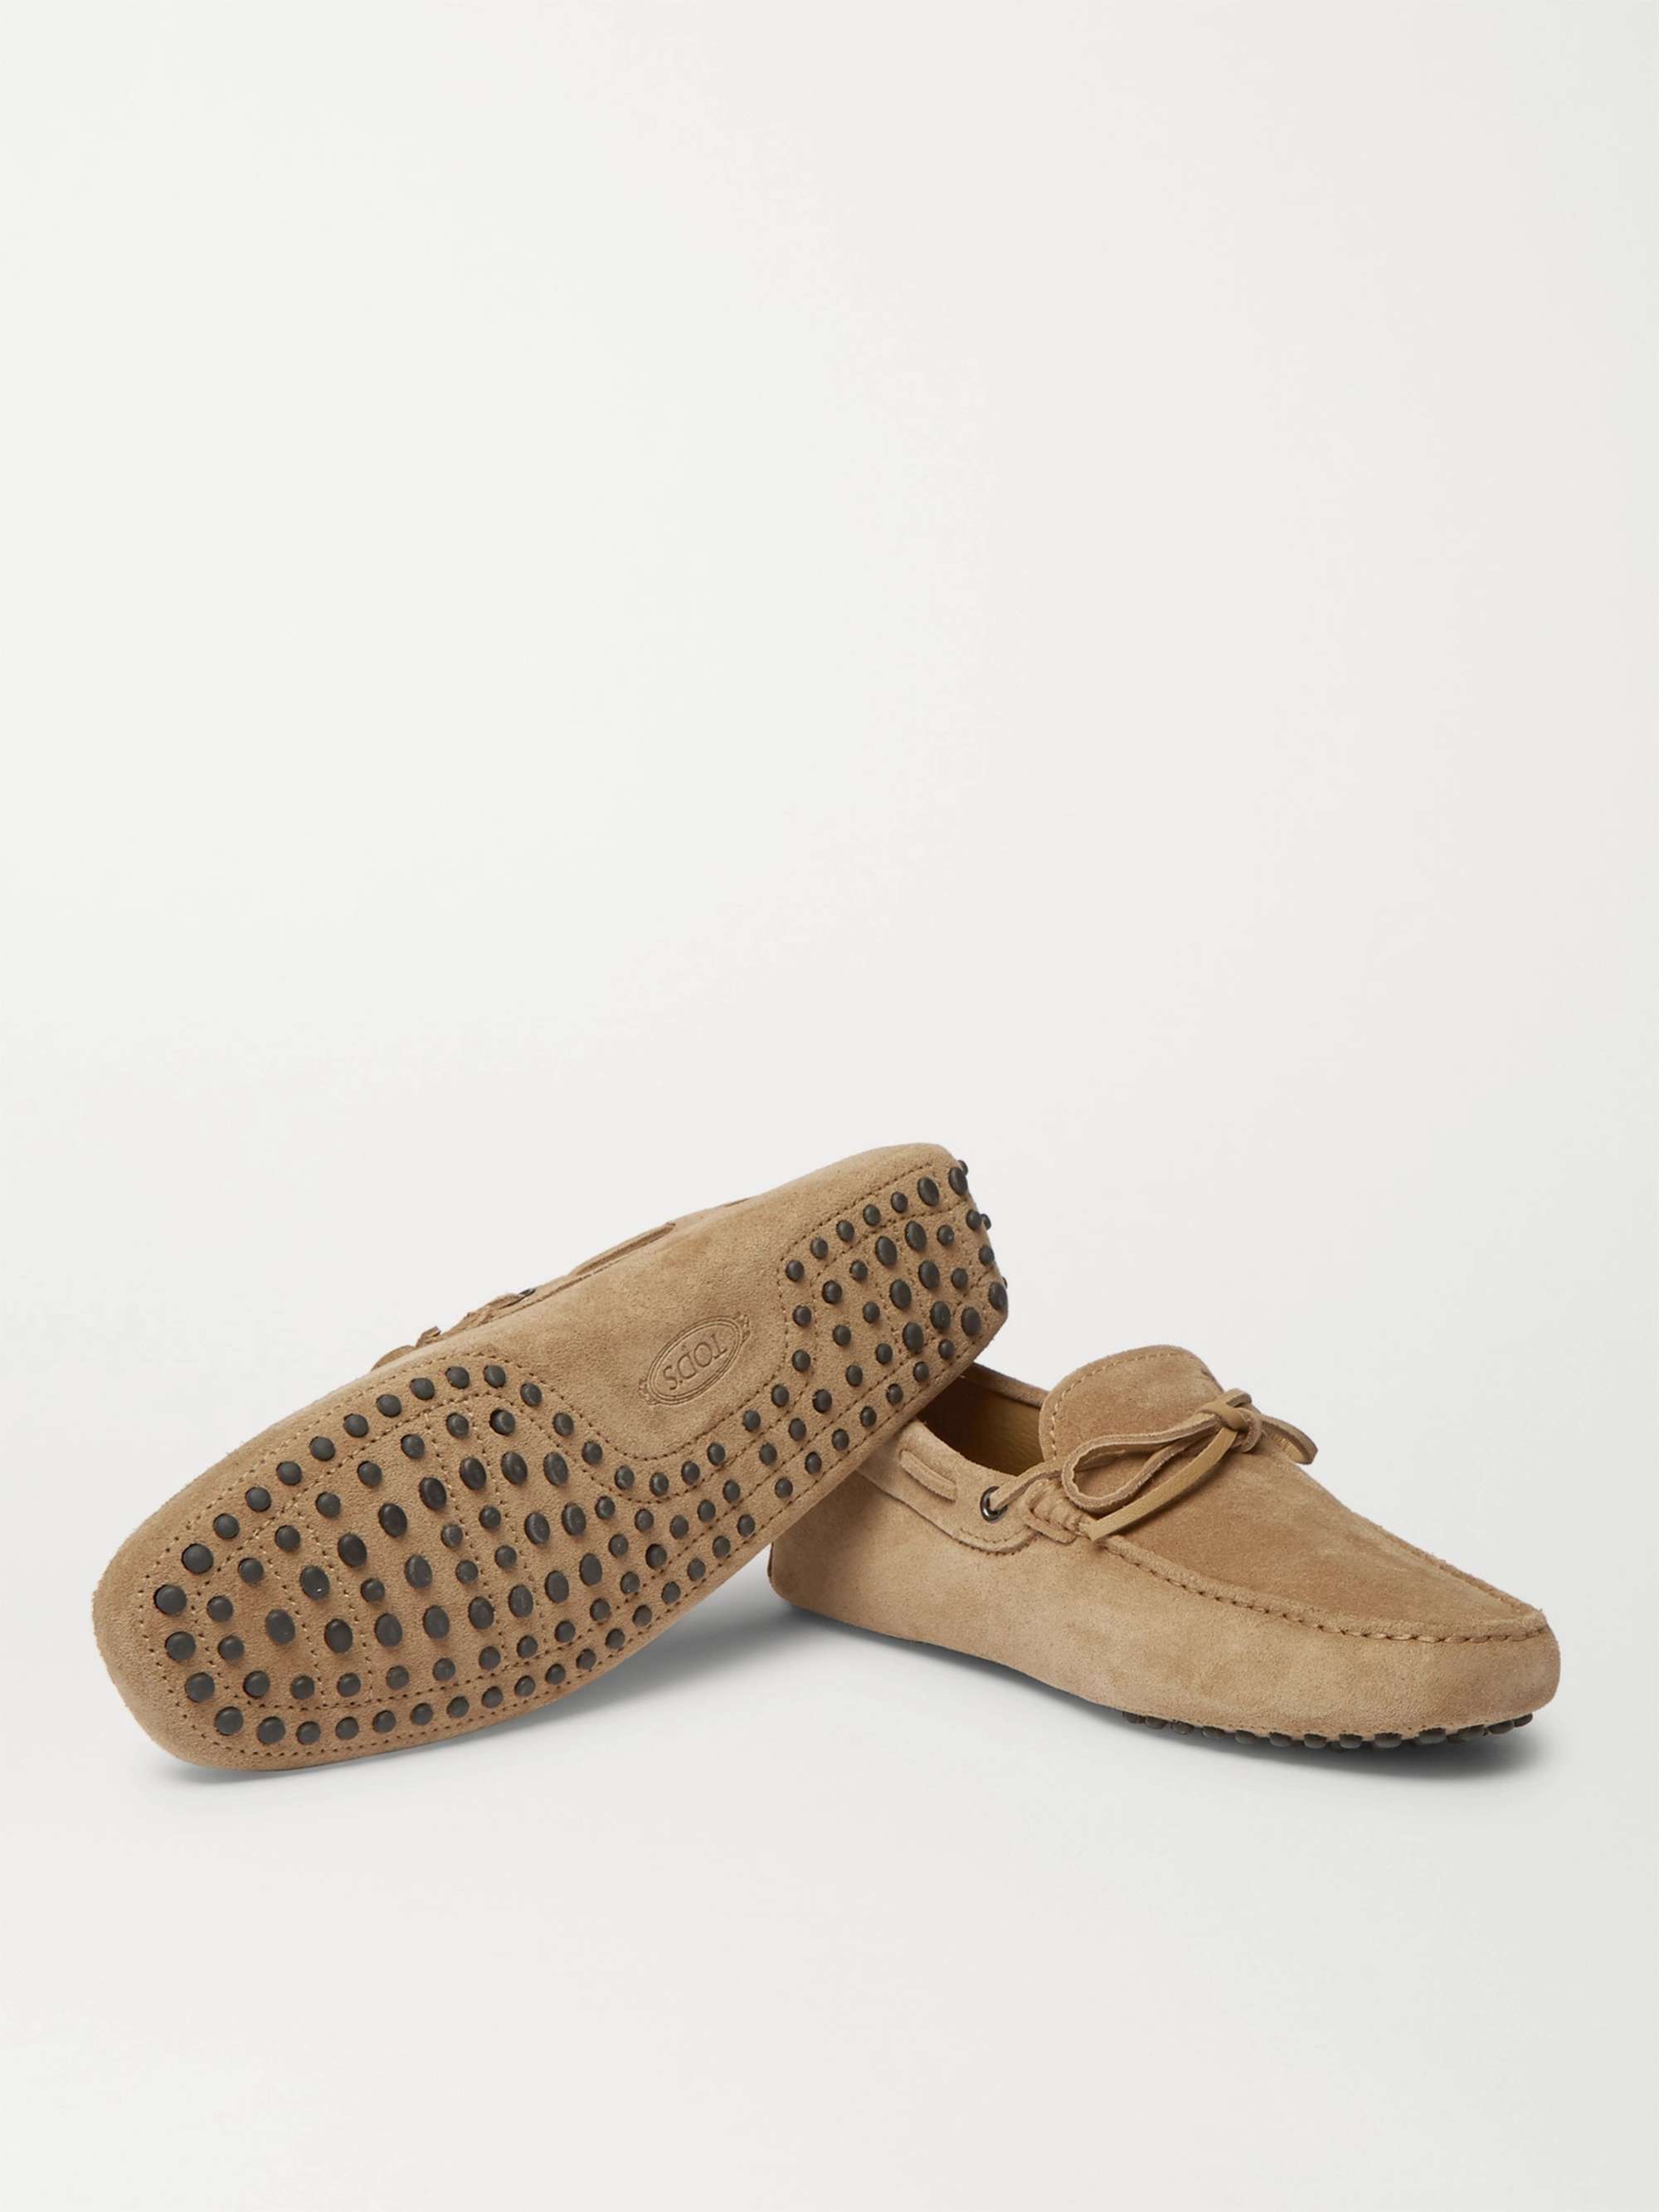 TOD'S Gommino Suede Driving Shoes